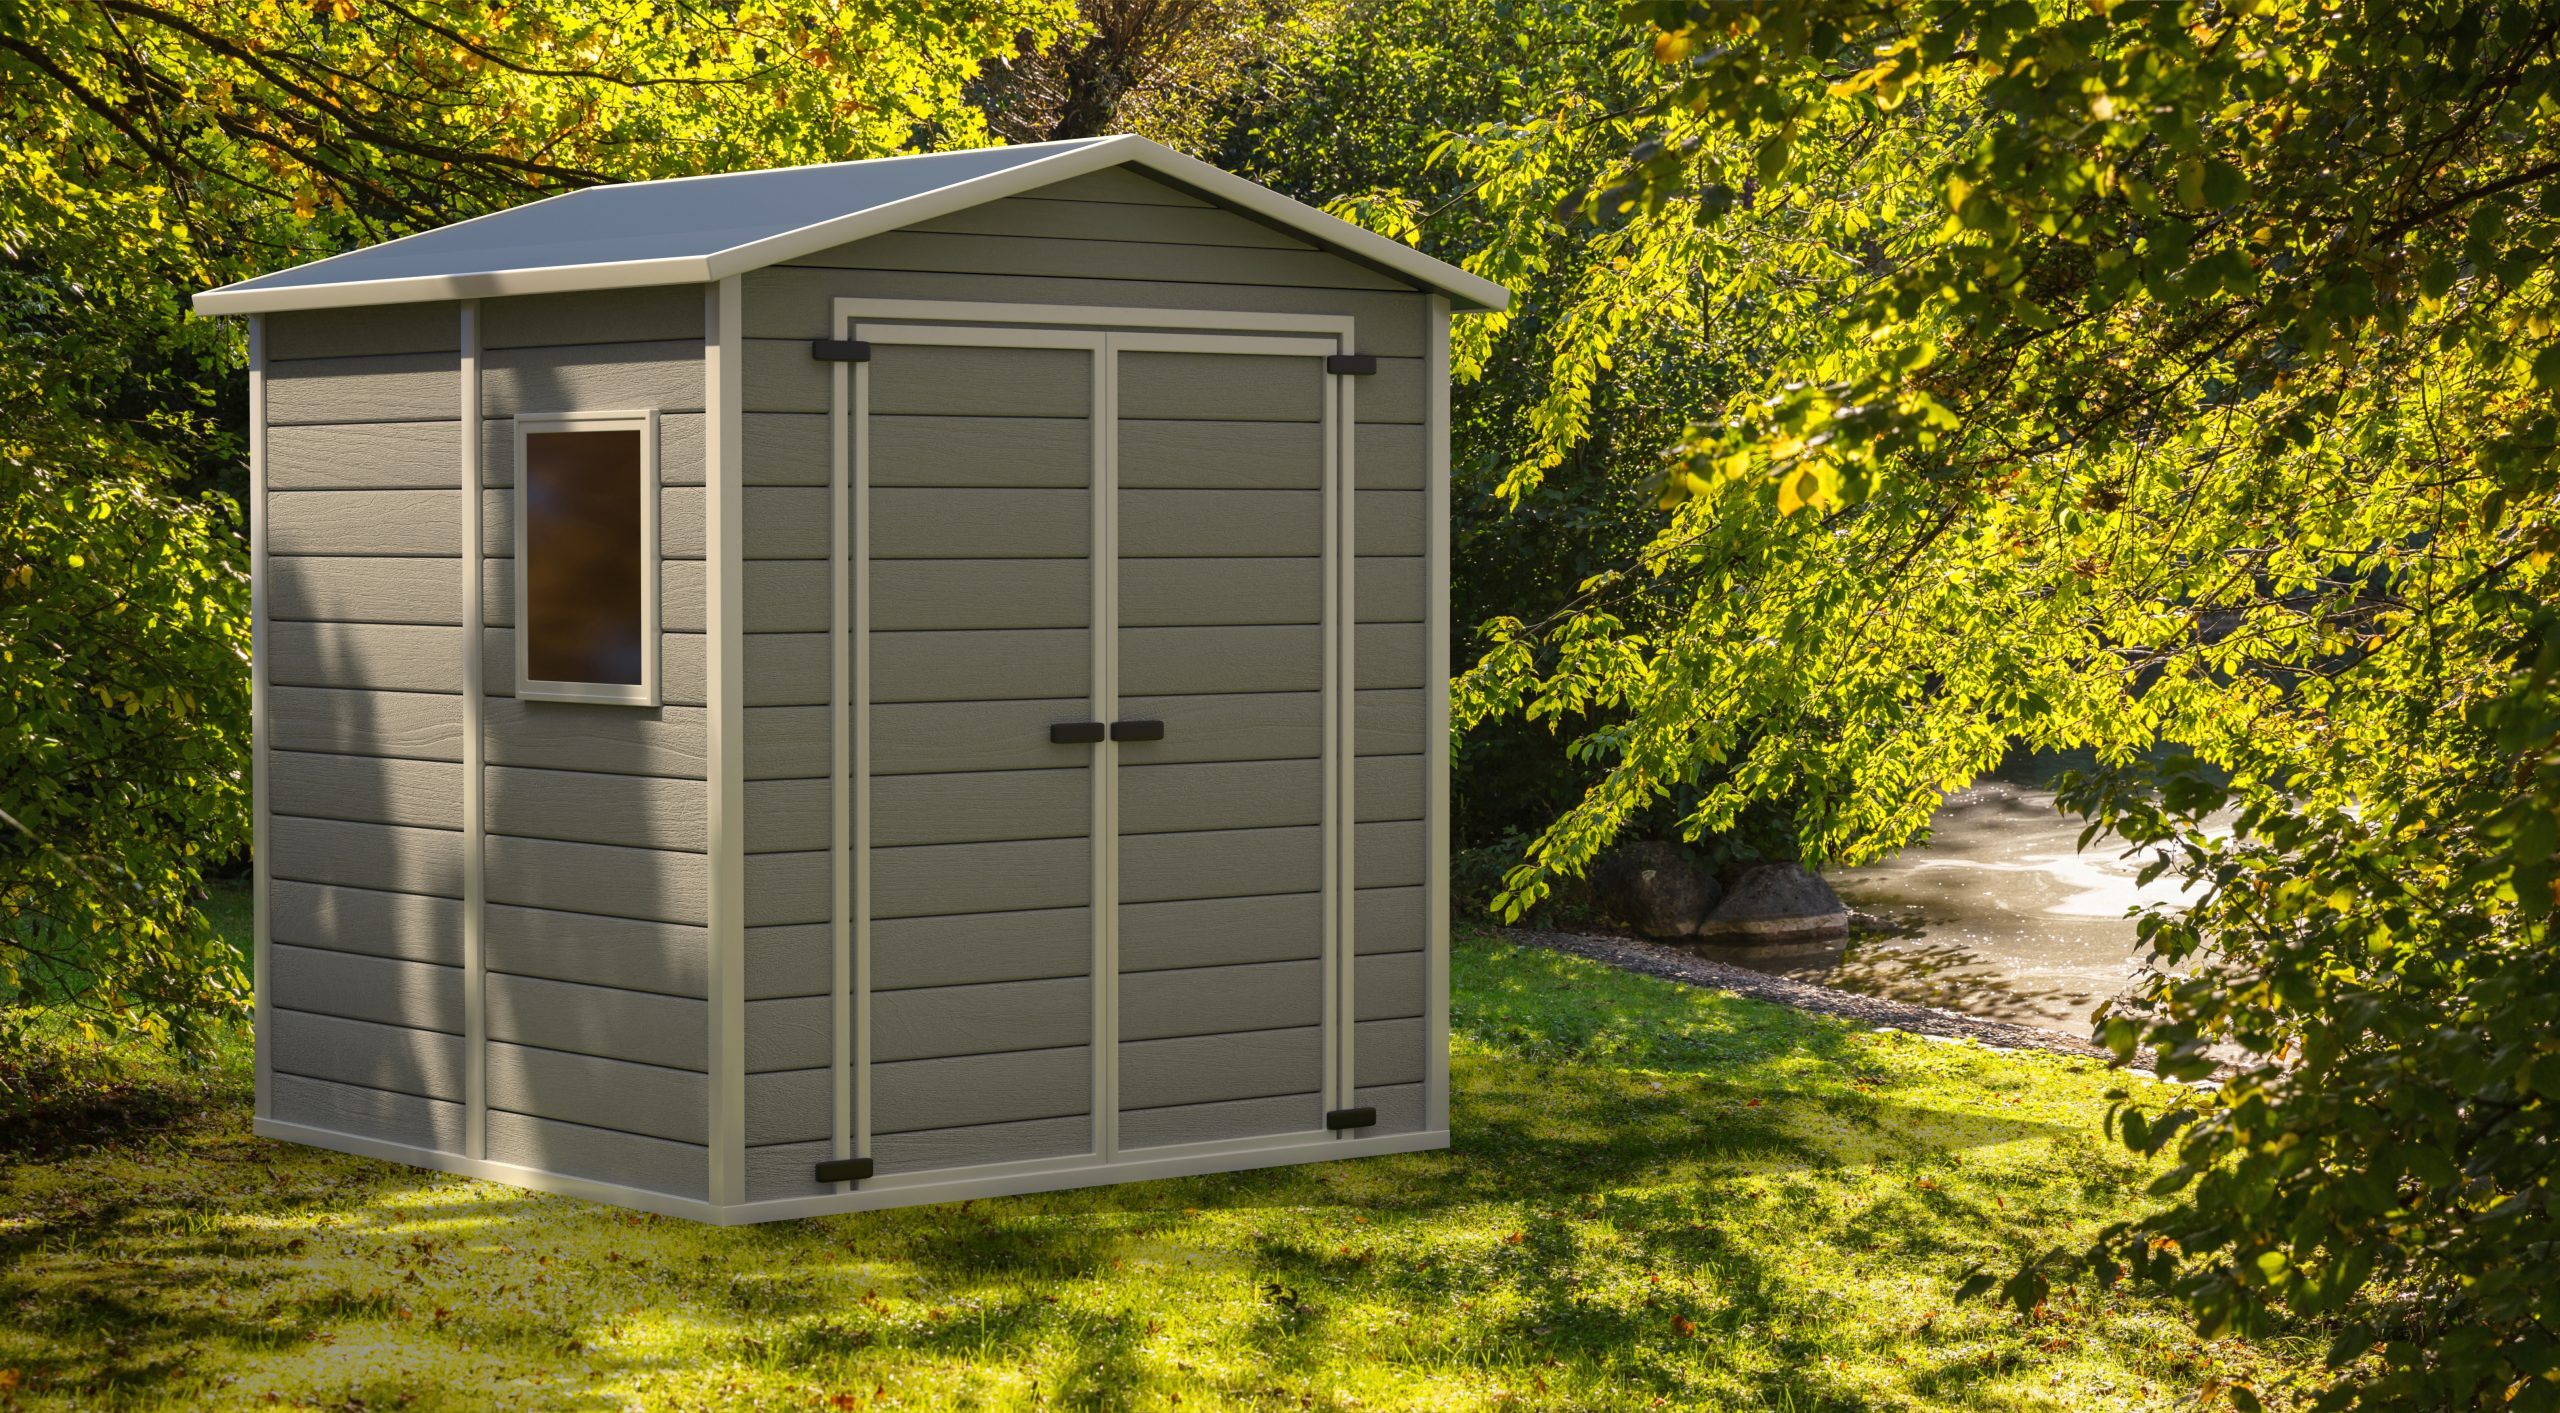 Garden shed on nature green background. Gray color gardening tools storage shed in the house backyard. 3d illustration